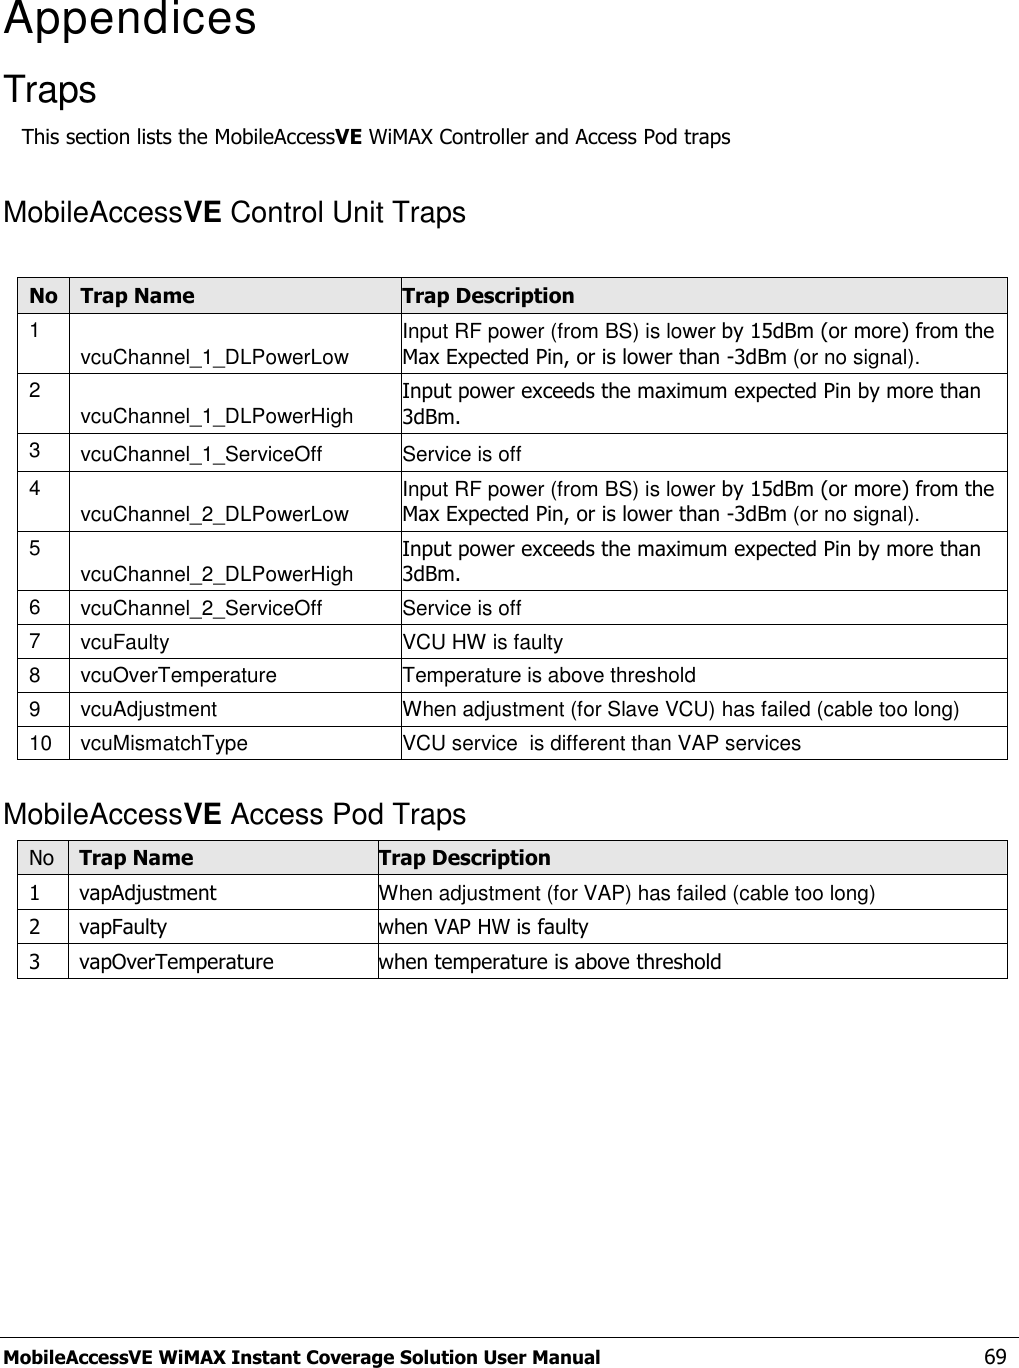  MobileAccessVE WiMAX Instant Coverage Solution User Manual   69  Appendices Traps This section lists the MobileAccessVE WiMAX Controller and Access Pod traps MobileAccessVE Control Unit Traps  No Trap Name Trap Description 1 vcuChannel_1_DLPowerLow Input RF power (from BS) is lower by 15dBm (or more) from the Max Expected Pin, or is lower than -3dBm (or no signal). 2 vcuChannel_1_DLPowerHigh Input power exceeds the maximum expected Pin by more than 3dBm. 3 vcuChannel_1_ServiceOff Service is off 4 vcuChannel_2_DLPowerLow Input RF power (from BS) is lower by 15dBm (or more) from the Max Expected Pin, or is lower than -3dBm (or no signal). 5 vcuChannel_2_DLPowerHigh Input power exceeds the maximum expected Pin by more than 3dBm. 6 vcuChannel_2_ServiceOff Service is off 7 vcuFaulty VCU HW is faulty 8 vcuOverTemperature Temperature is above threshold 9 vcuAdjustment When adjustment (for Slave VCU) has failed (cable too long) 10 vcuMismatchType VCU service  is different than VAP services  MobileAccessVE Access Pod Traps No Trap Name Trap Description 1 vapAdjustment When adjustment (for VAP) has failed (cable too long) 2 vapFaulty when VAP HW is faulty 3 vapOverTemperature when temperature is above threshold  